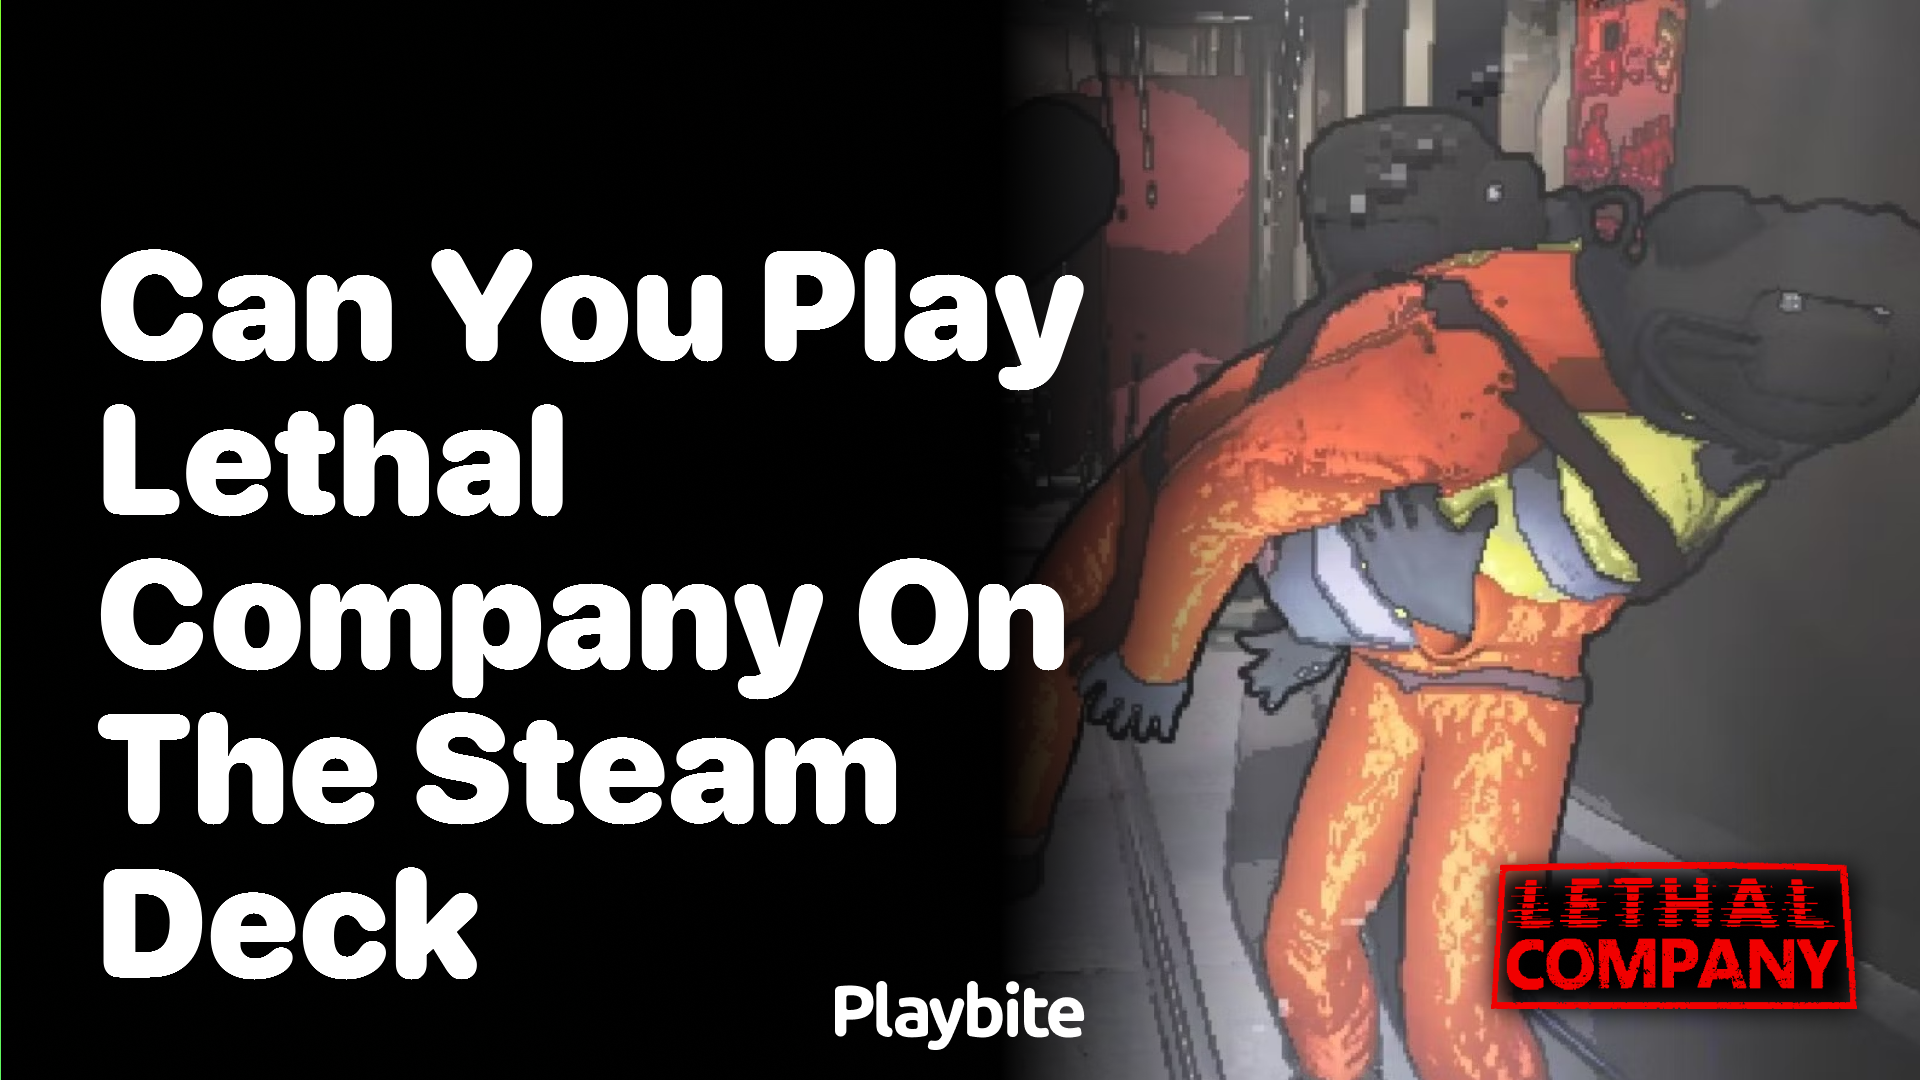 Can You Play Lethal Company on the Steam Deck?